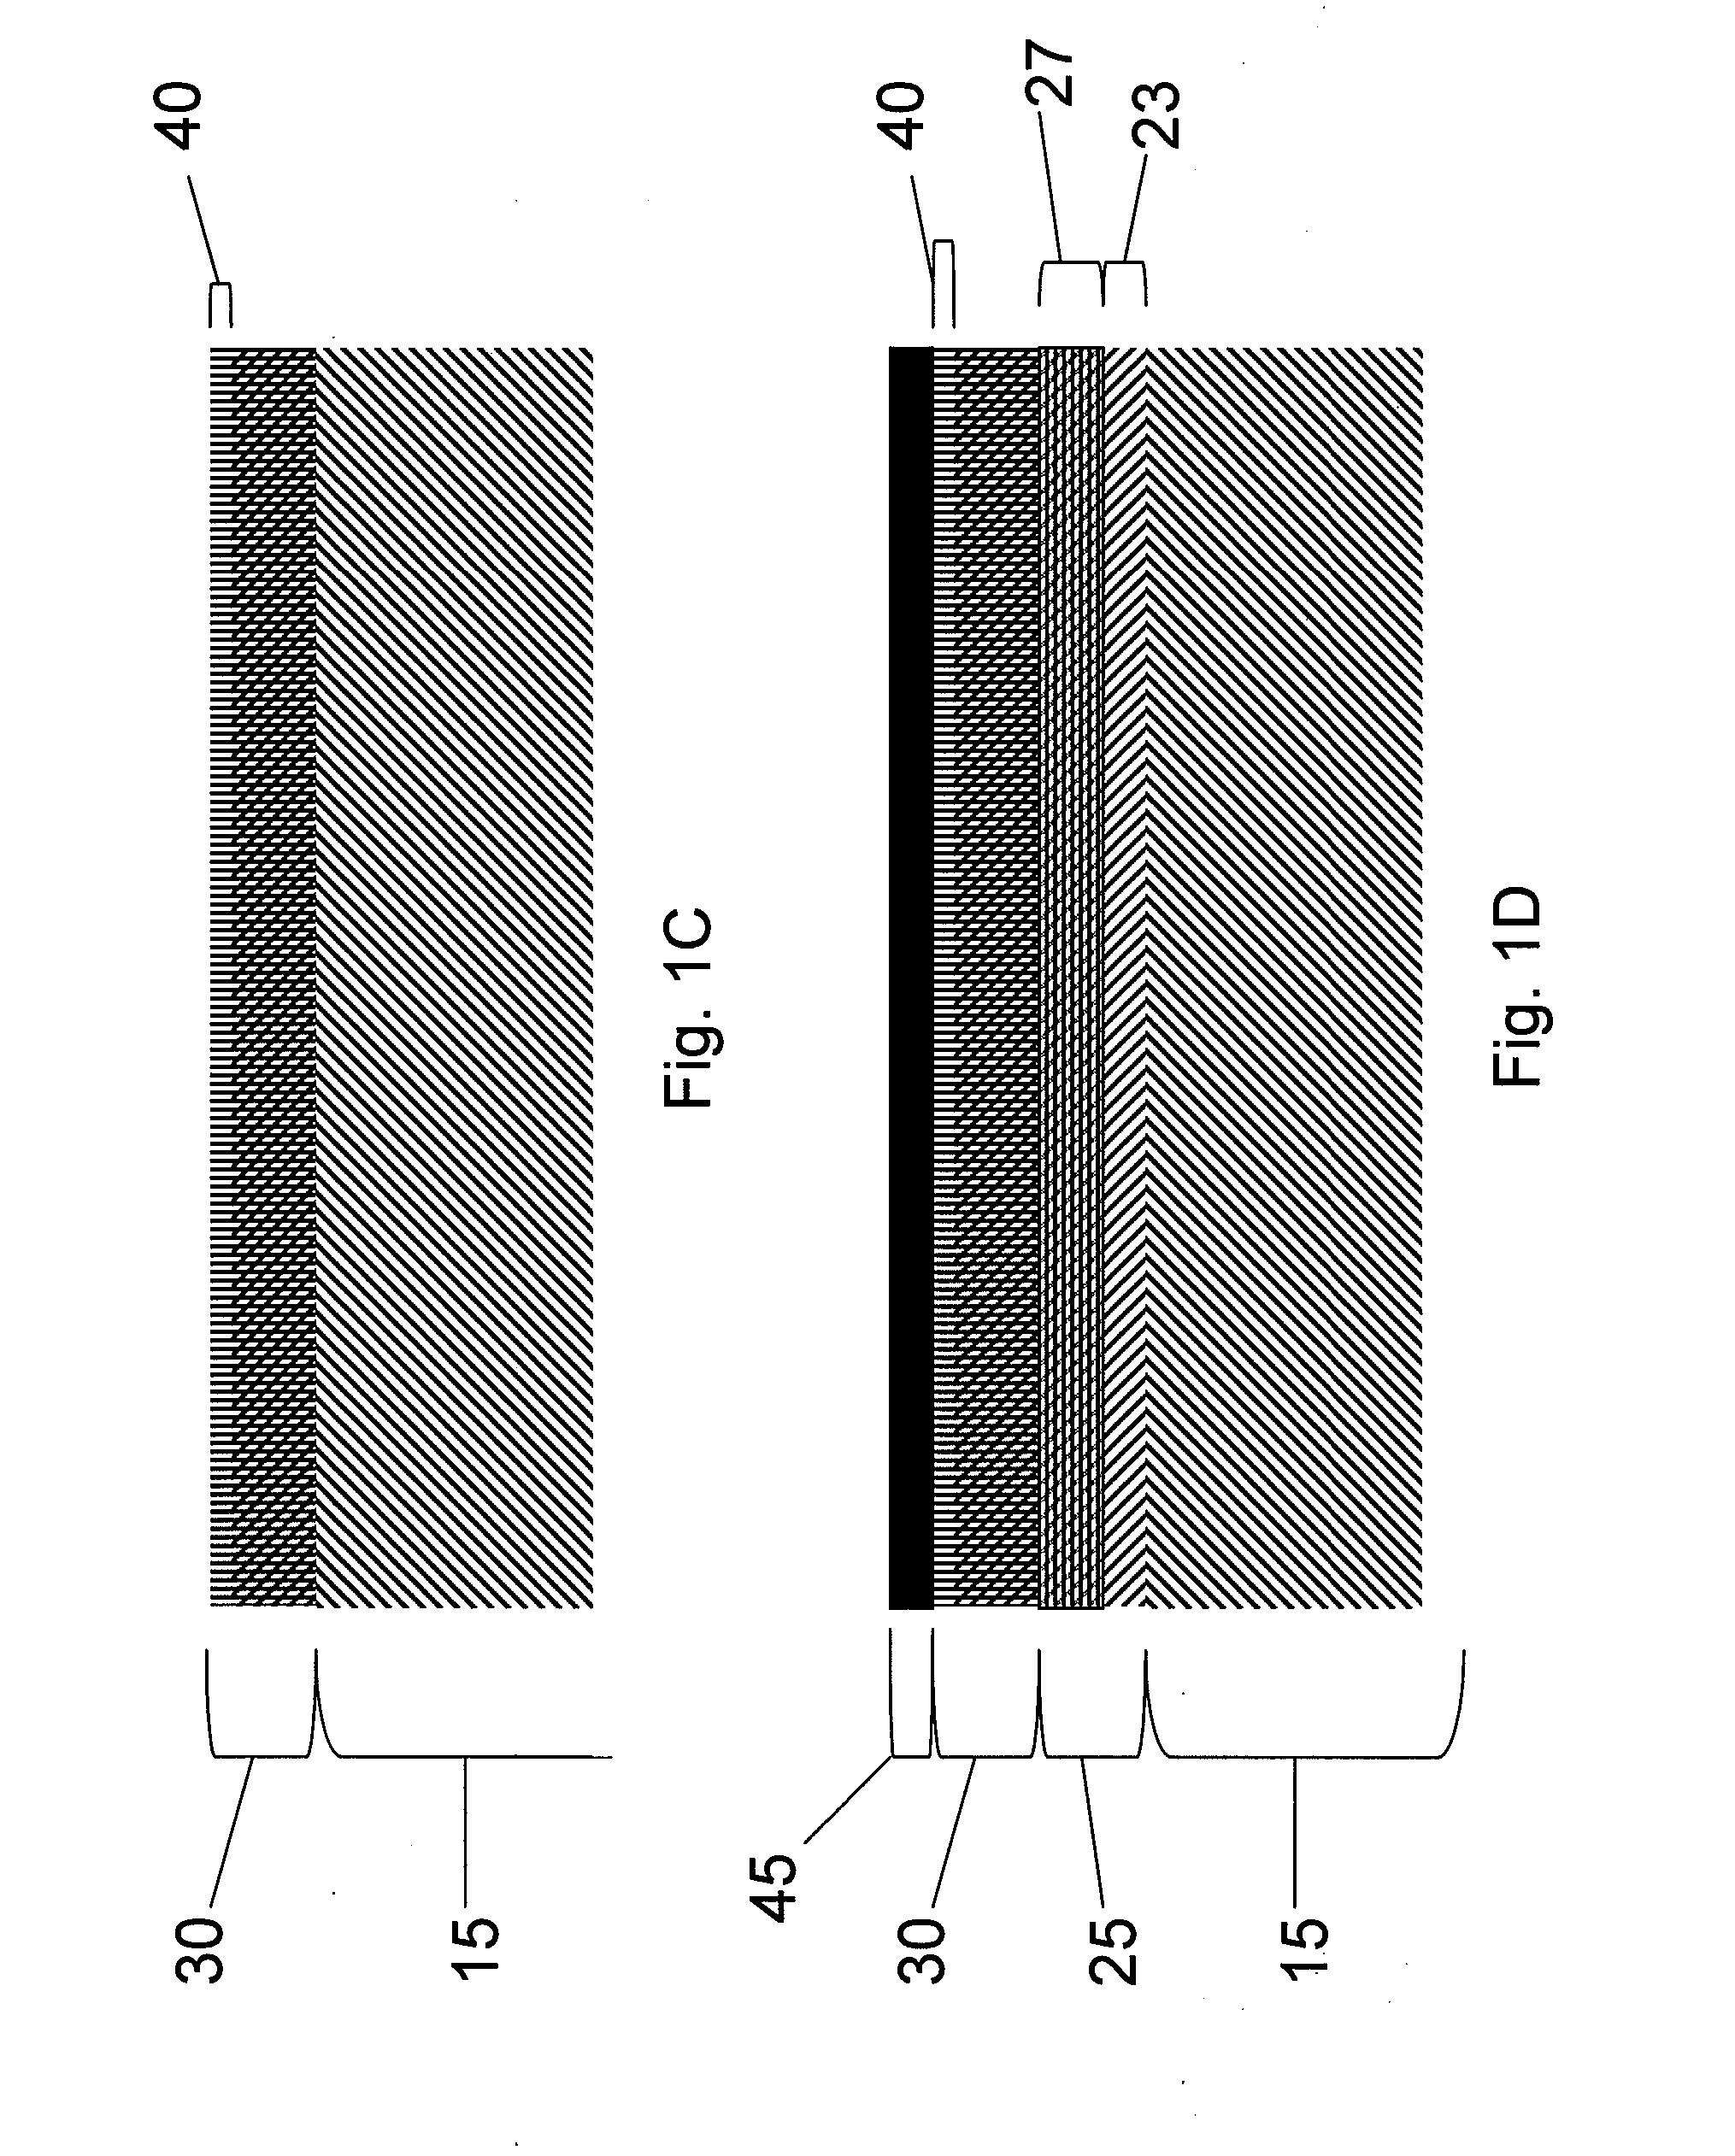 Implantable devices having textured surfaces and methods of forming the same